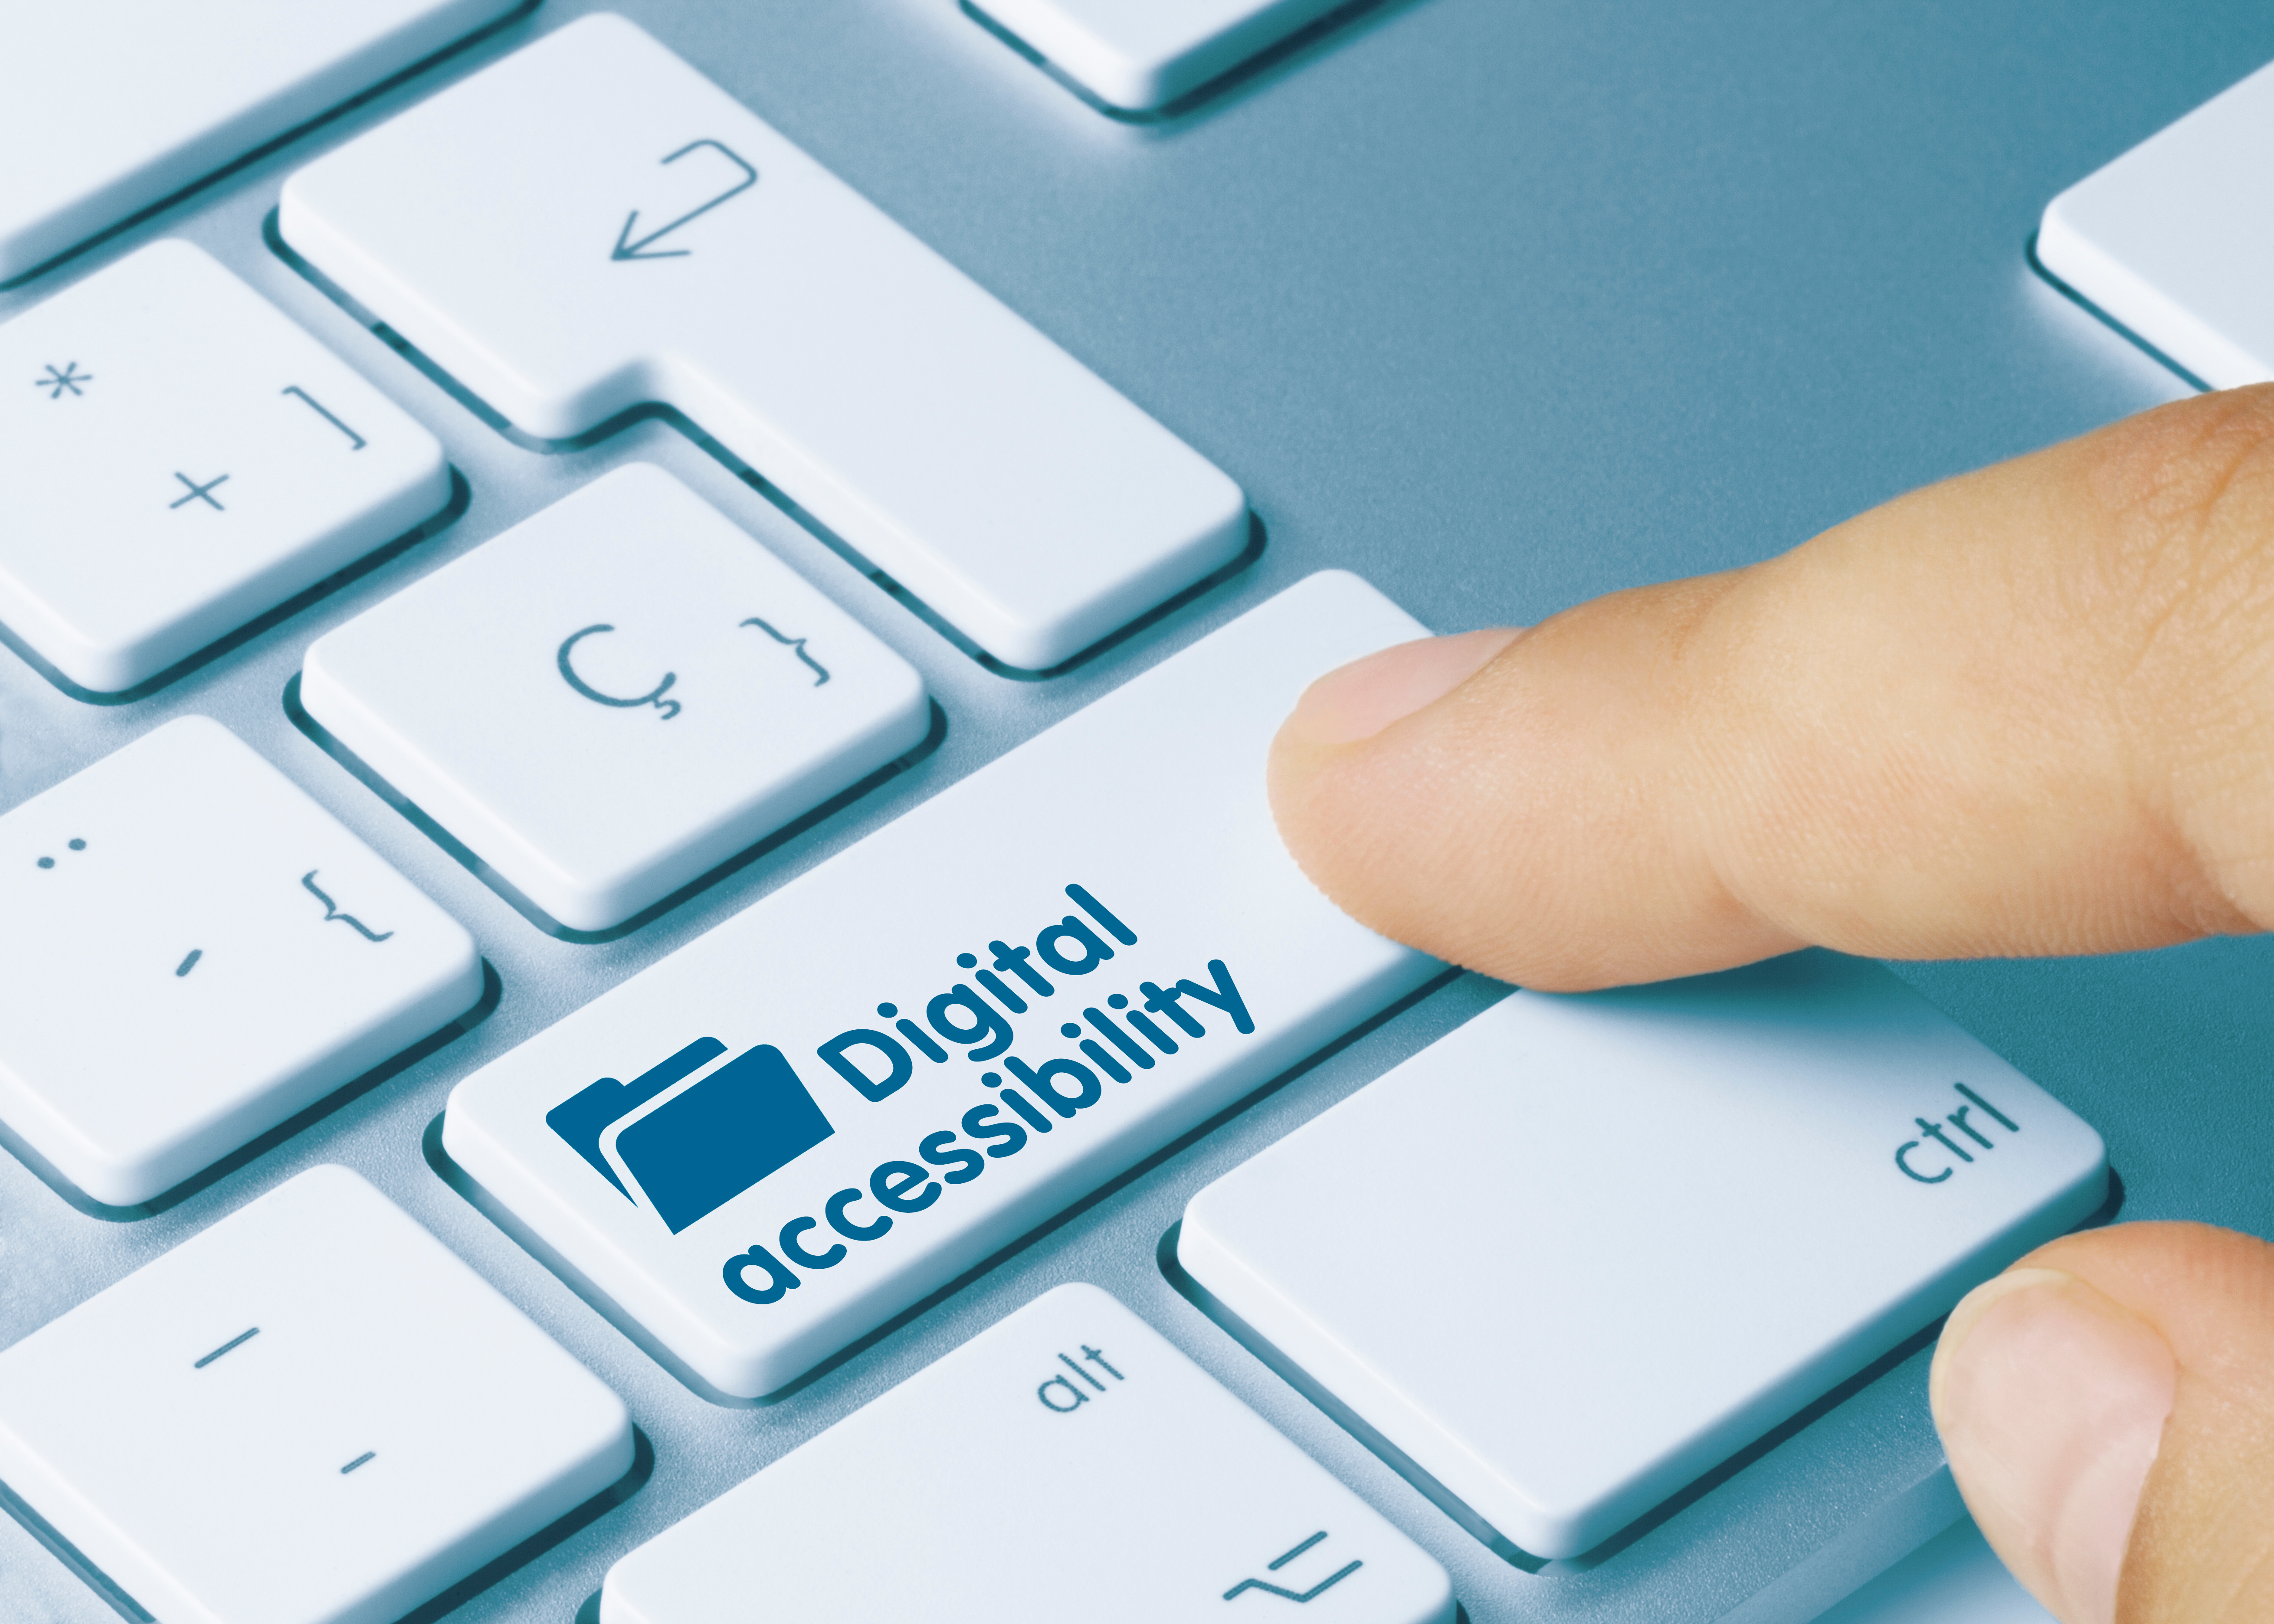 Digital accessibility in the keyboard